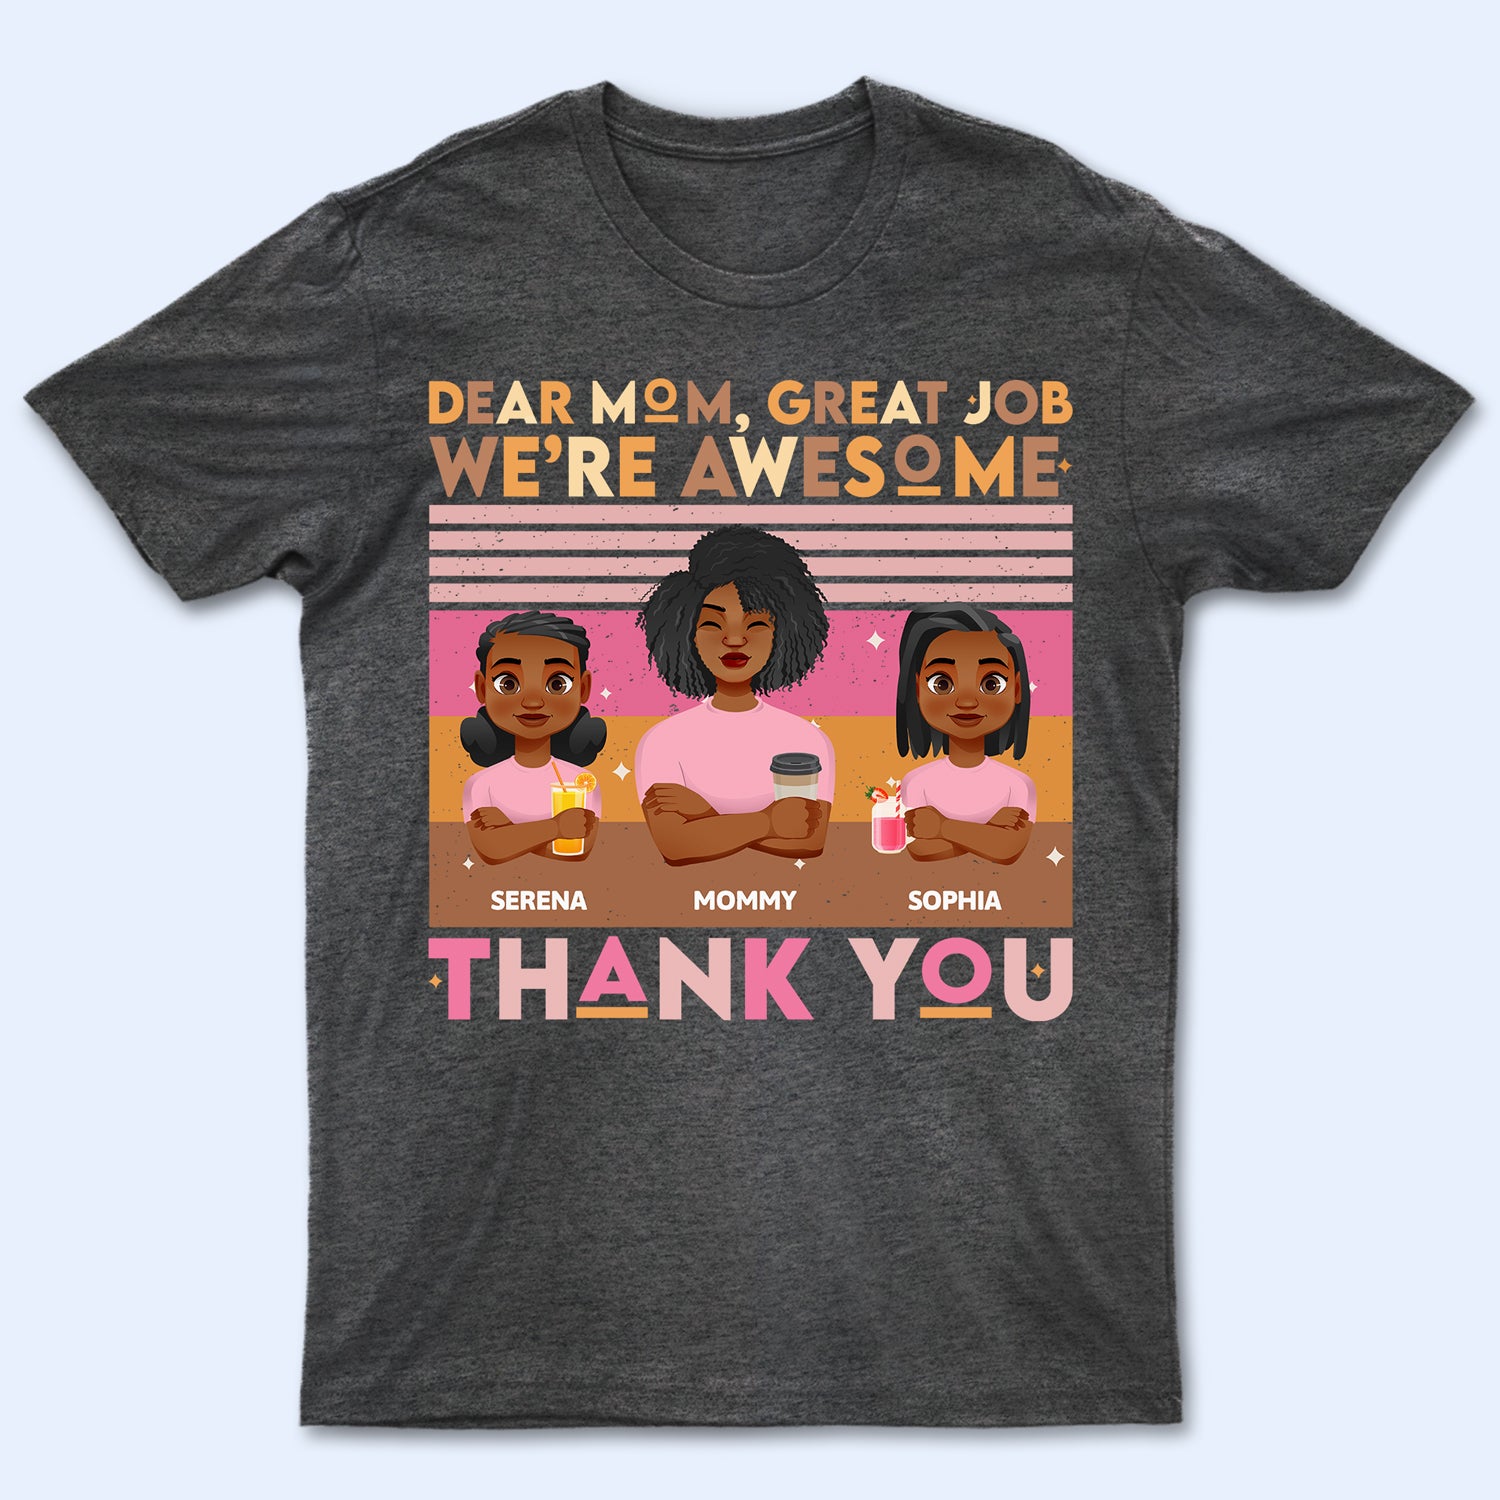 Dear Mom Great Job We Are Awesome Pink Palette - Birthday, Loving Gift For Mum, Mother, Nana, Grandma - Personalized T Shirt